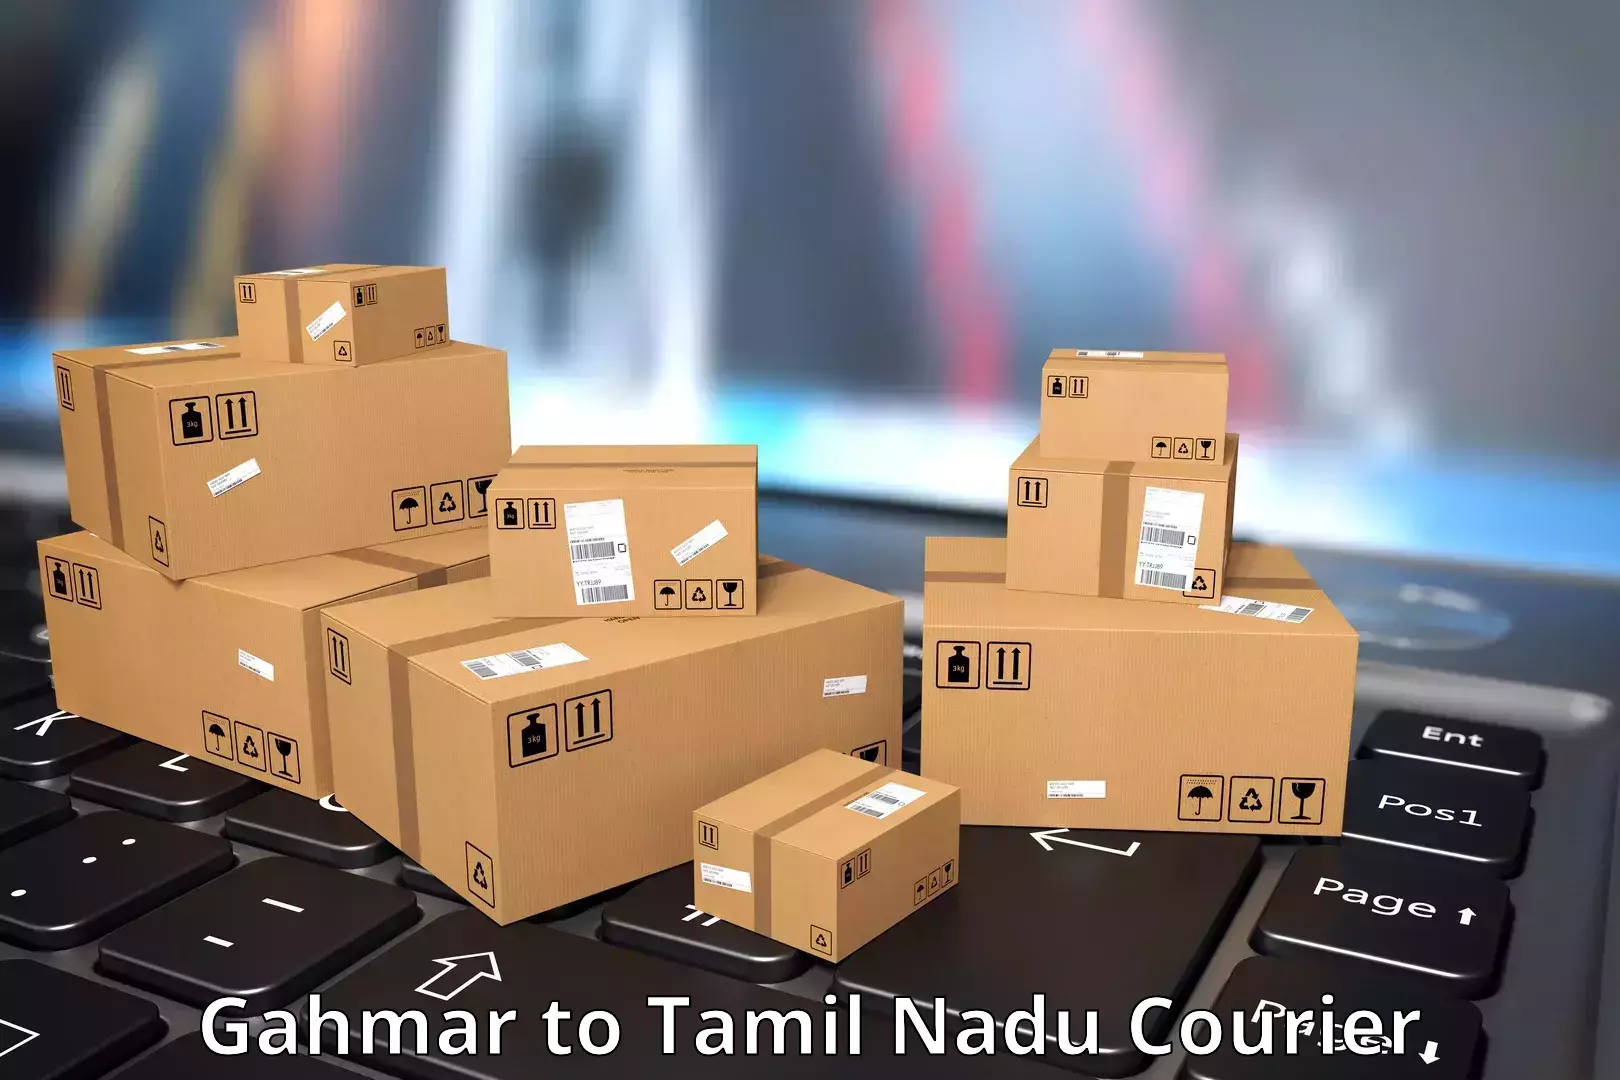 Express logistics service Gahmar to Vellore Institute of Technology